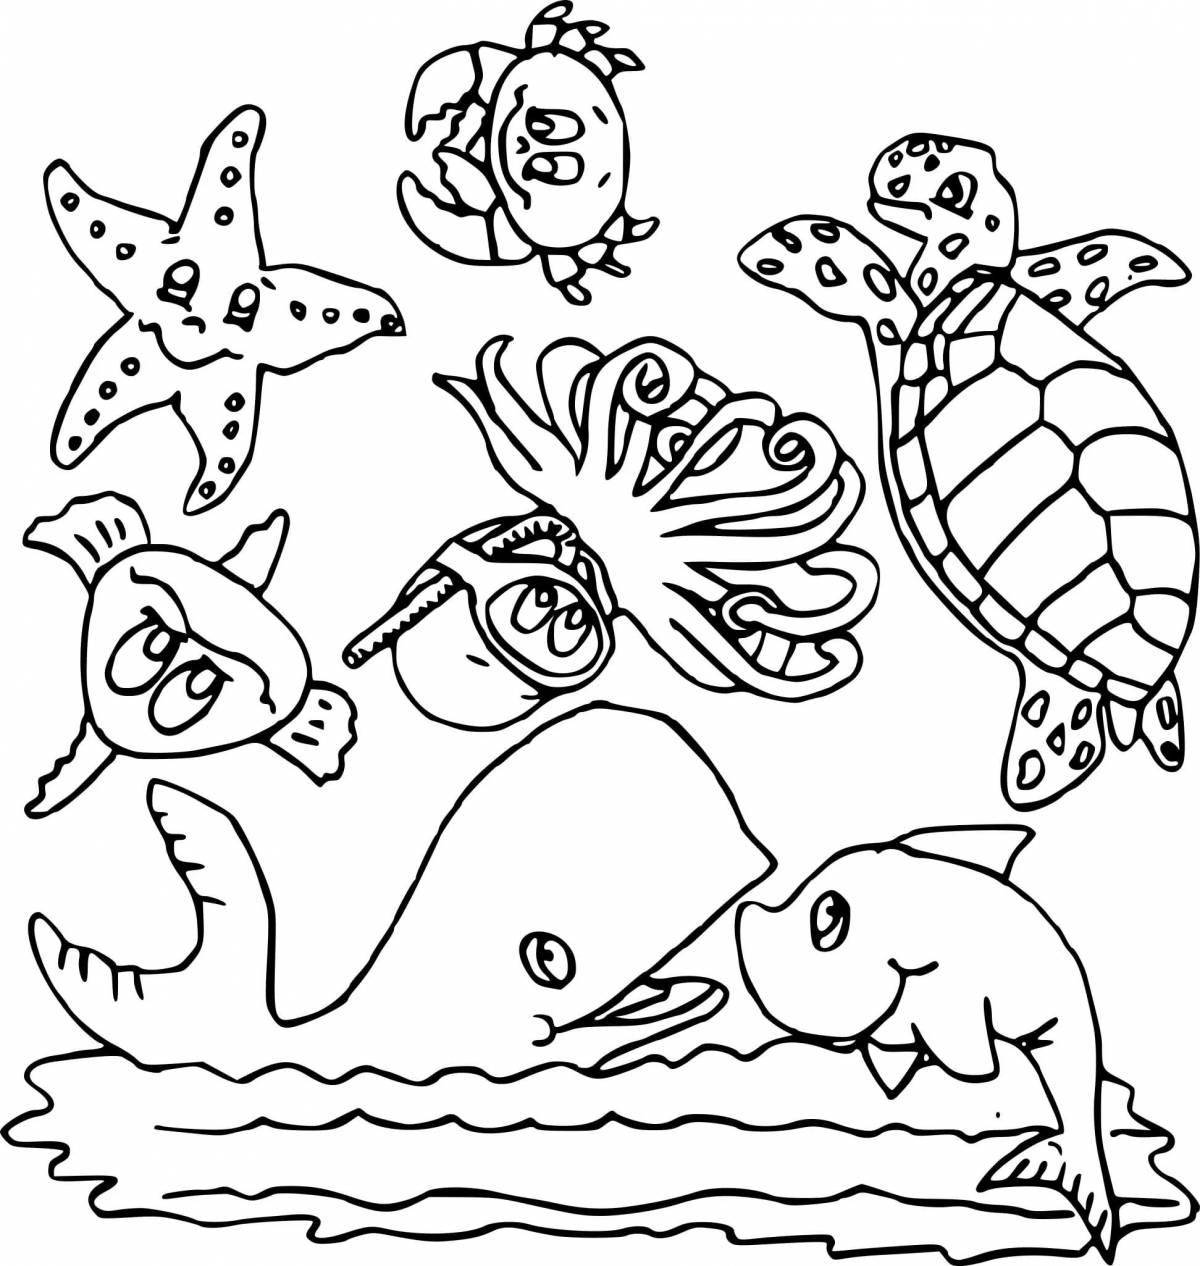 Incredible marine life coloring book for 6-7 year olds